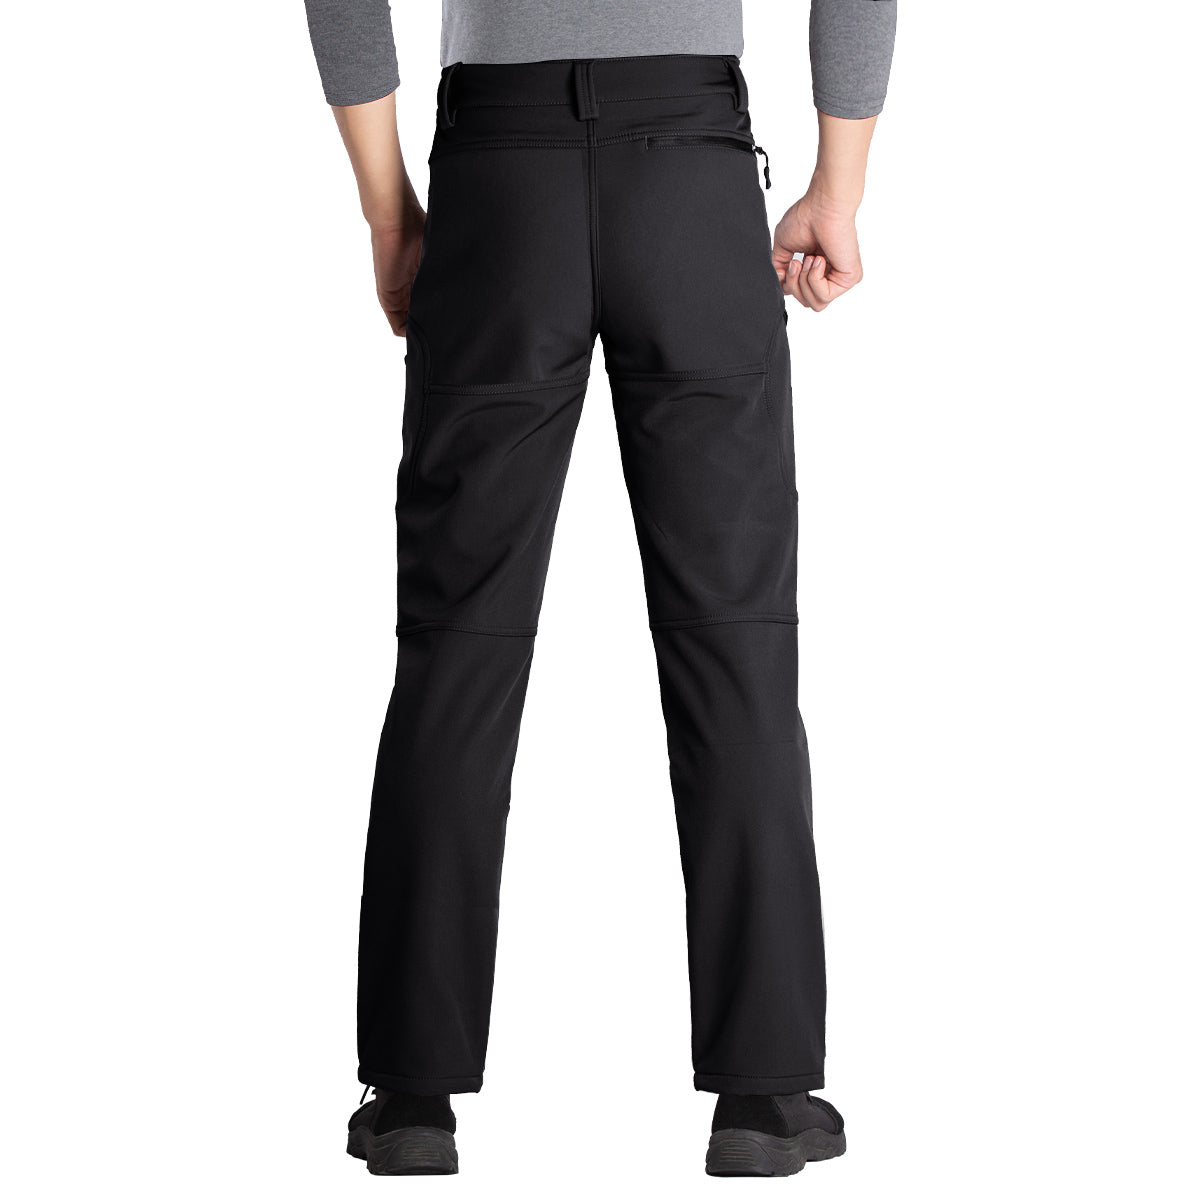 Mens Softshell Fleece Lined Cargo Pants with Belt